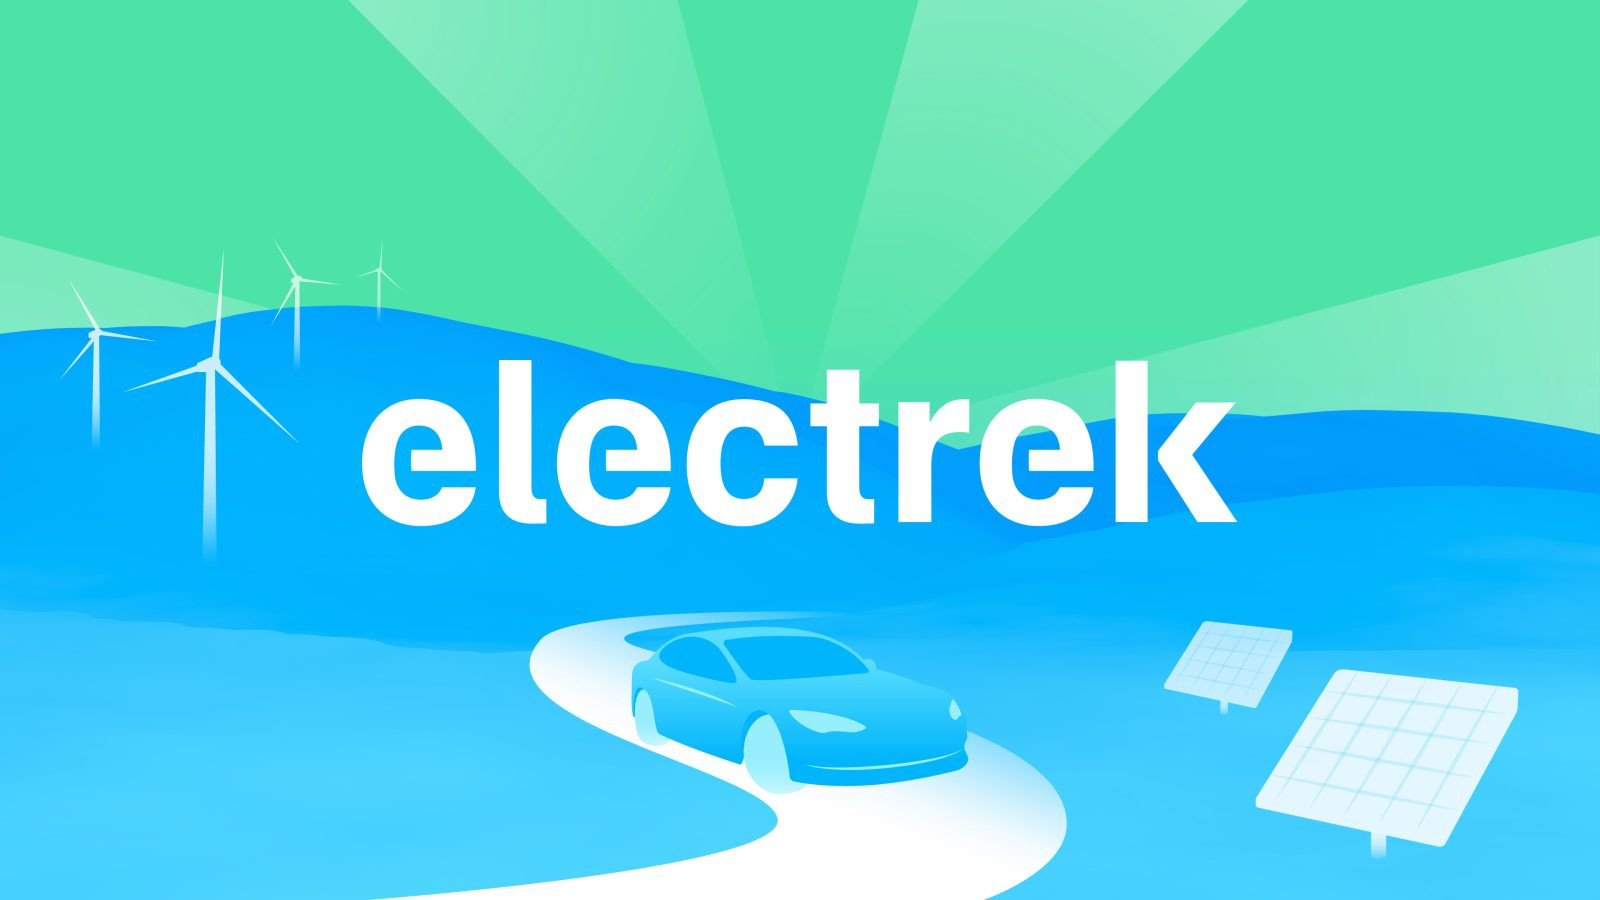 threshold vase filler rocks of electrek charge forward in electrek podcast tesla model 3 pricing new autopilot features chevy camaro electric and more